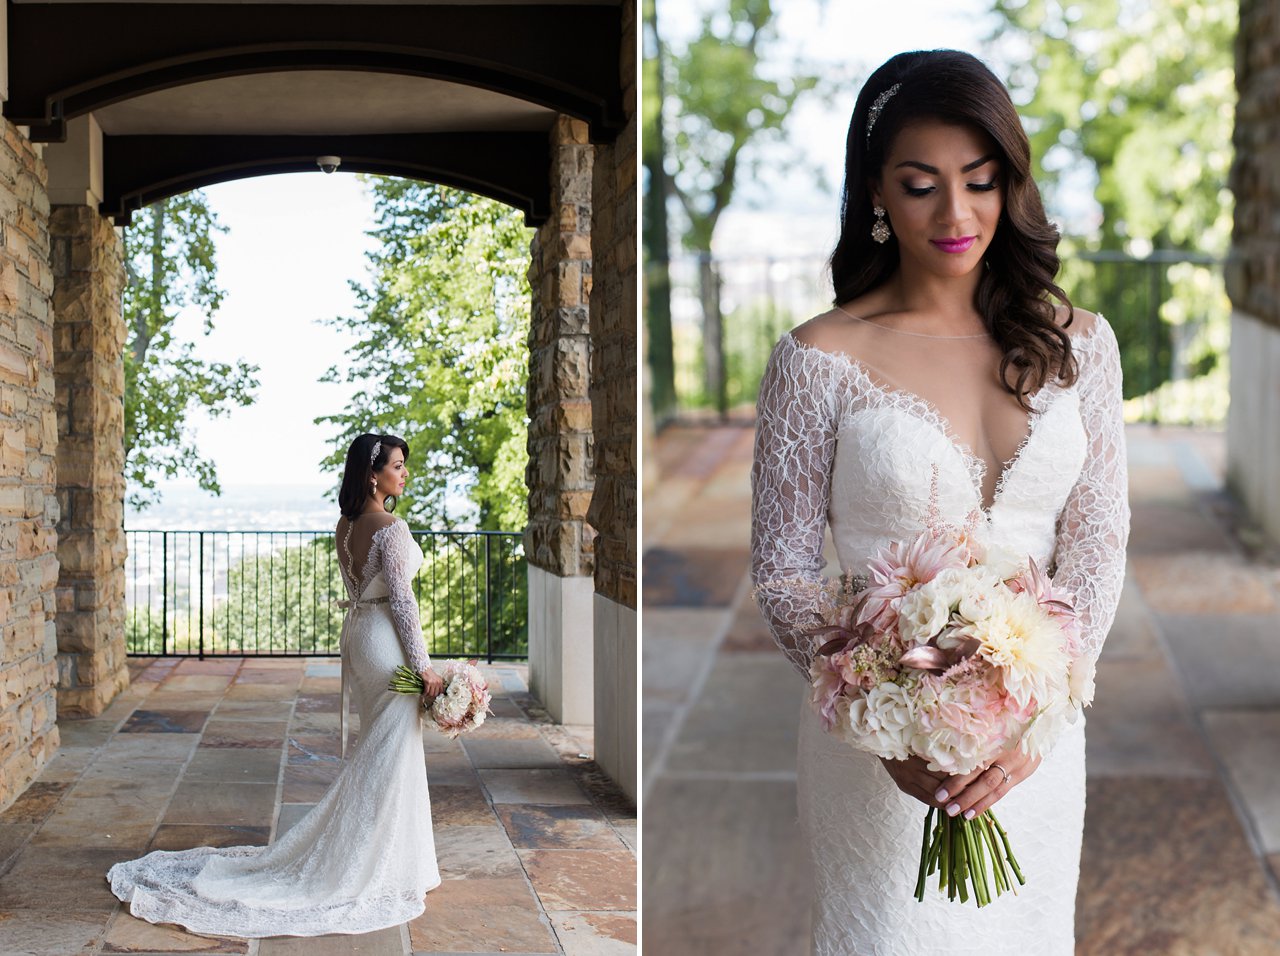 Traditional wedding day portrait of bride wearing long sleeve lace wedding dress with plunging illusion neckline, holding rose gold and blush bouquet. 